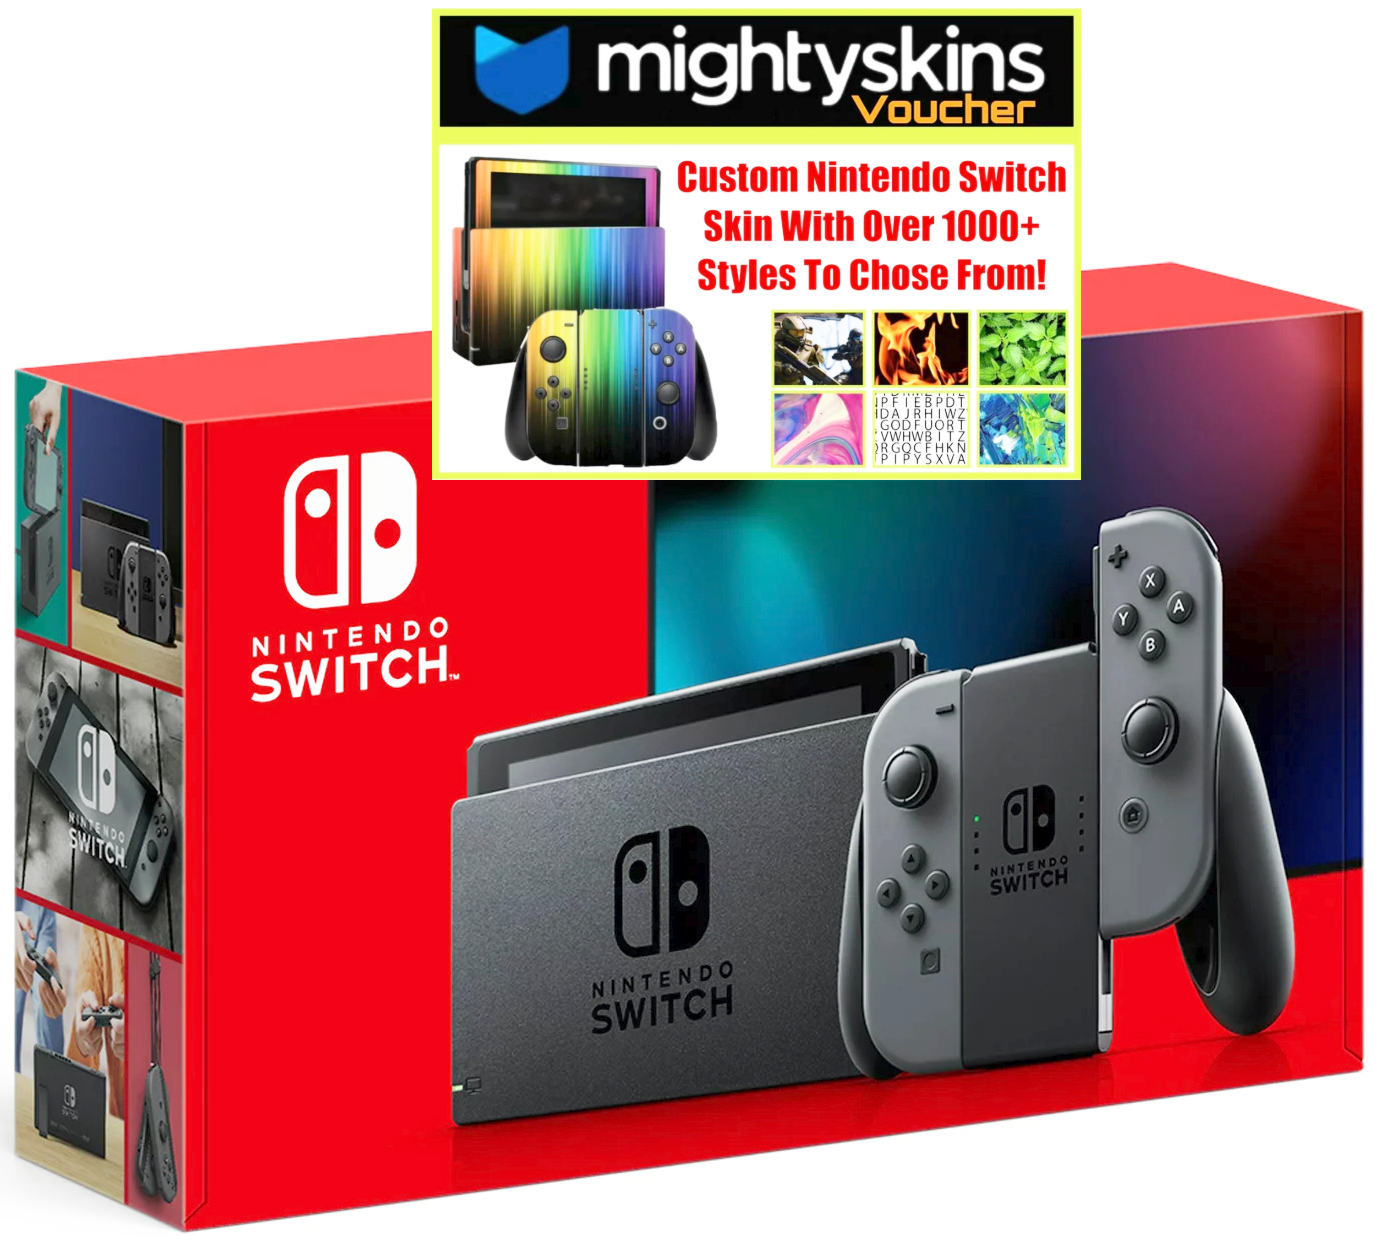 Nintendo Switch Console with Gray Joy Con with MightySkins Voucher - Limited Bundle (JP Edition) - image 1 of 6